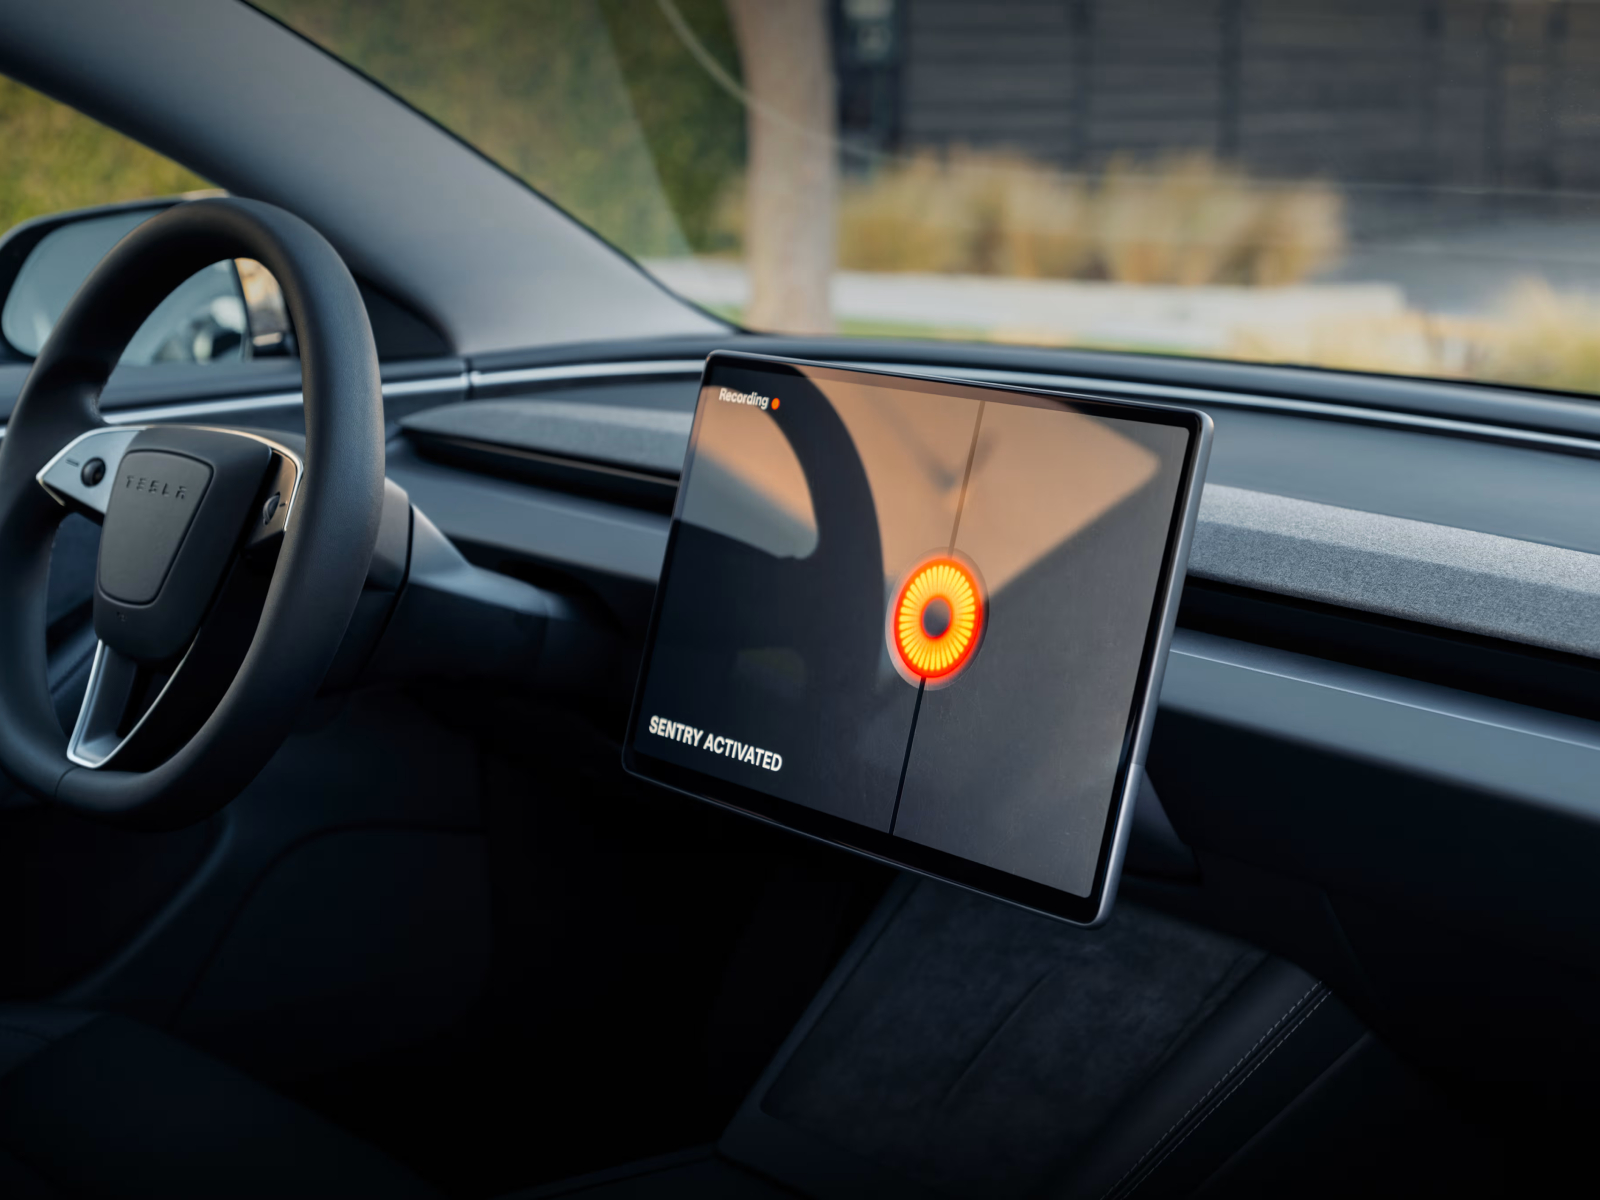 tesla model 3 refresh a set to sentry mode monitor surrounding and send alerts phone